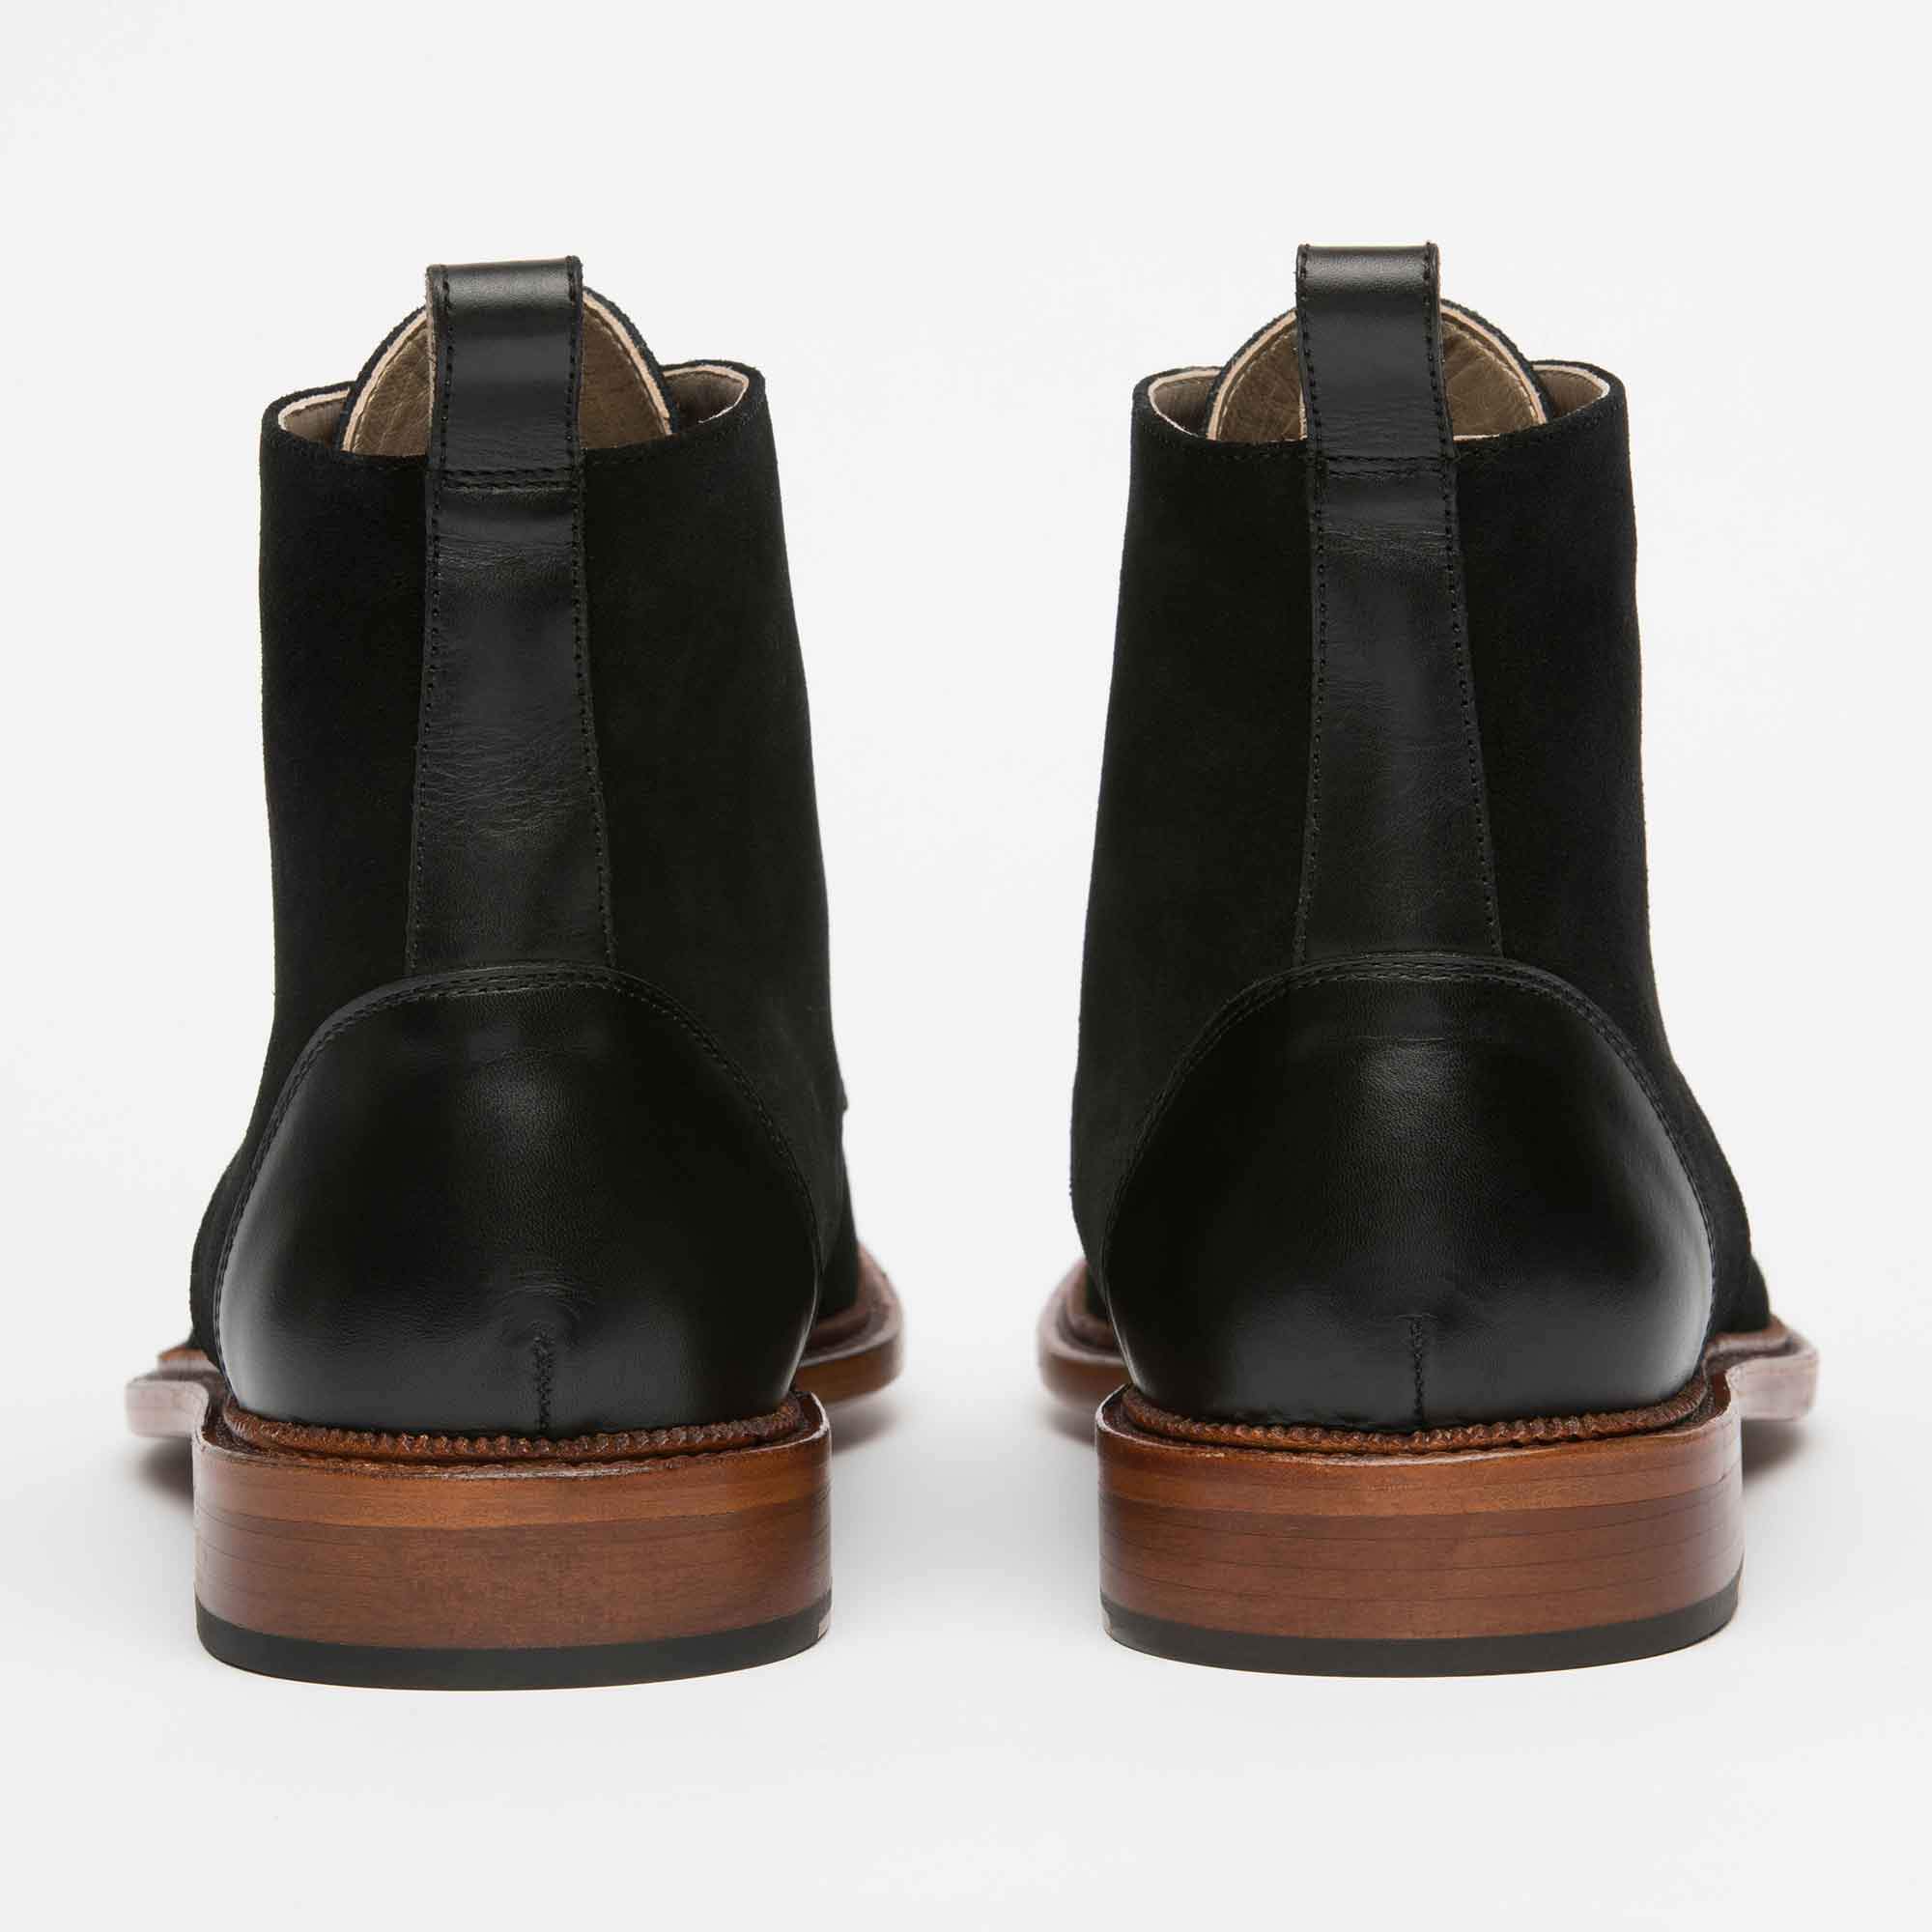 The Troy Boot - Black Suede | TAFT